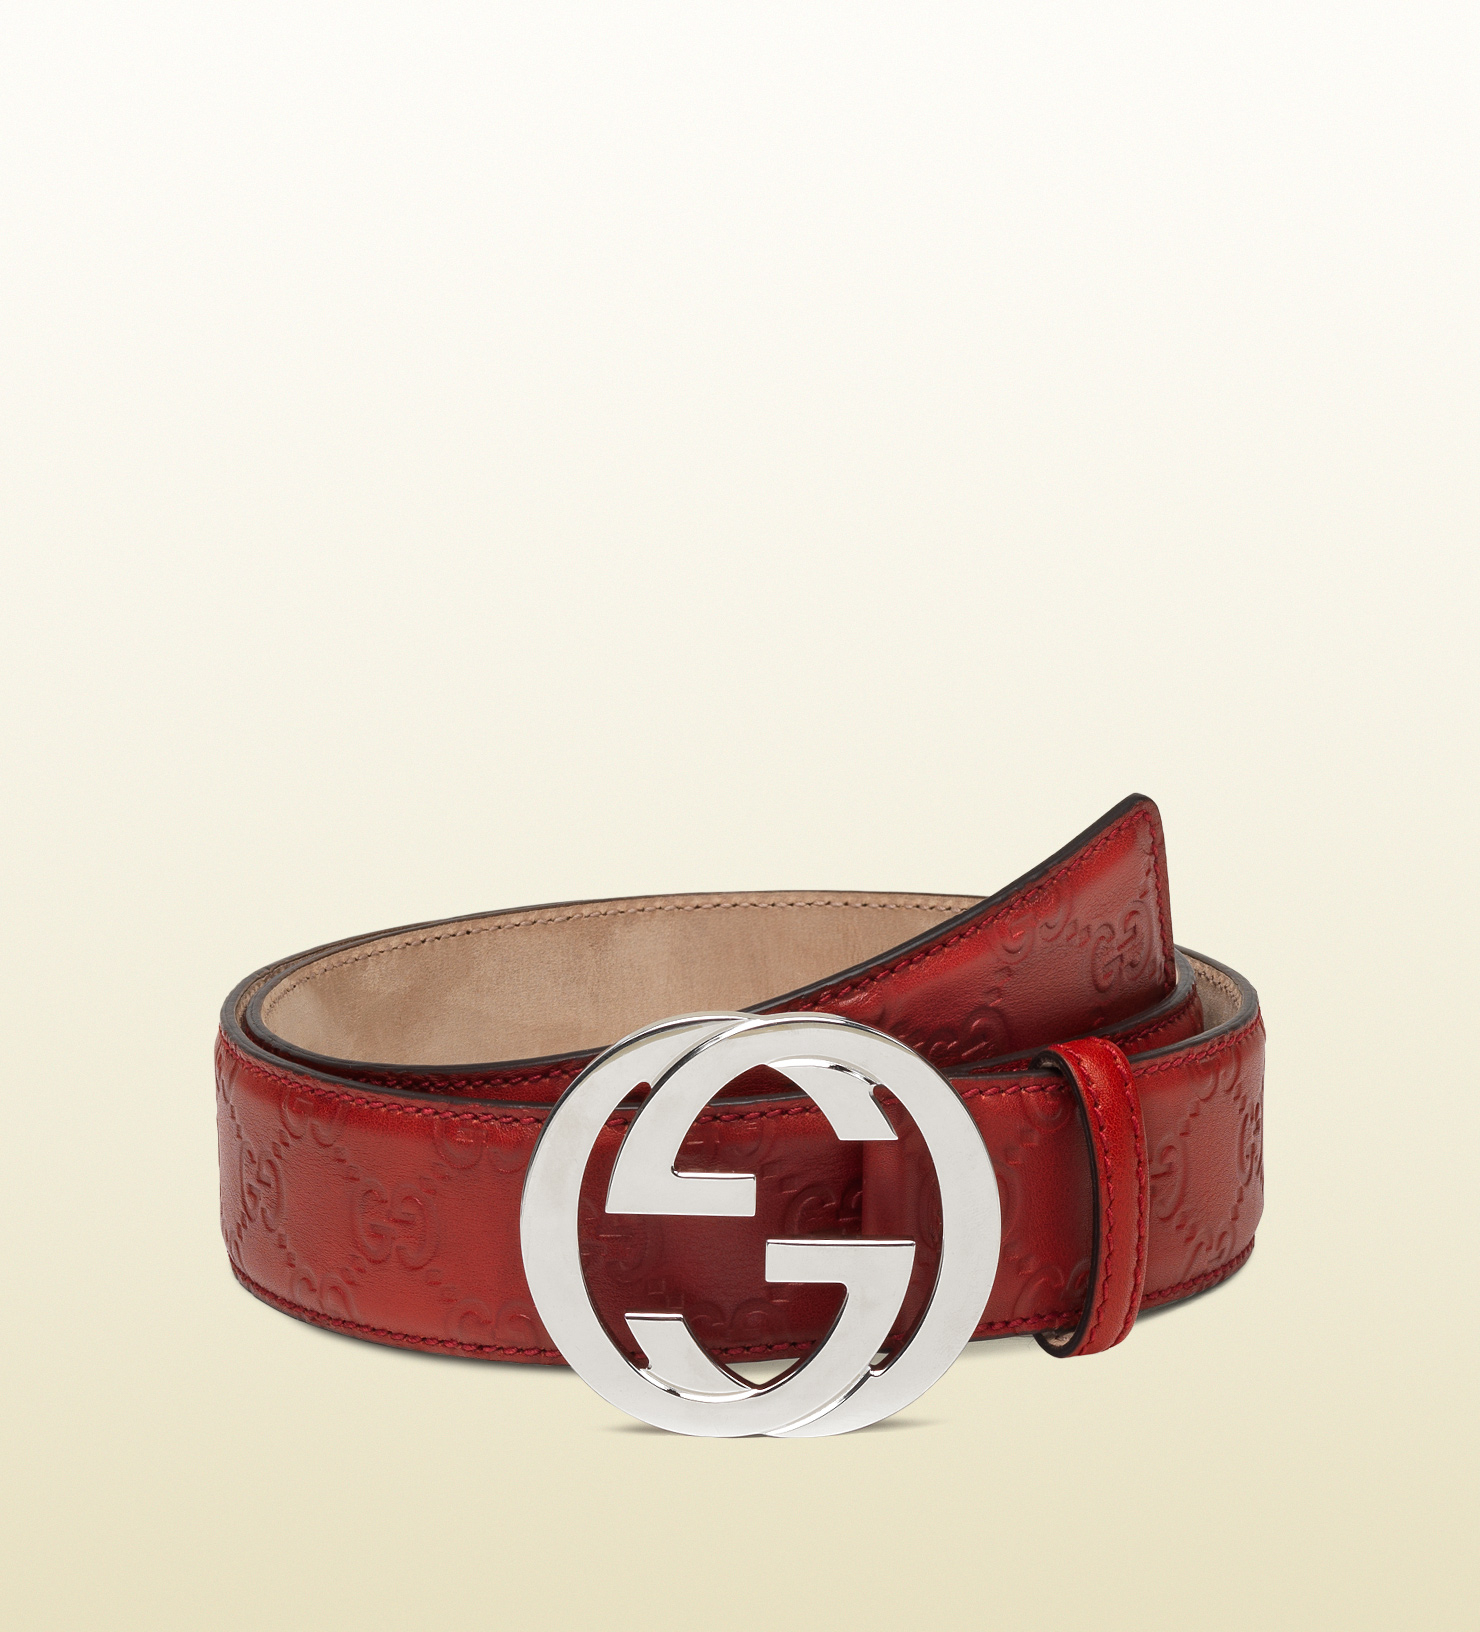 Lyst - Gucci Belt With Interlocking G Buckle in Red for Men